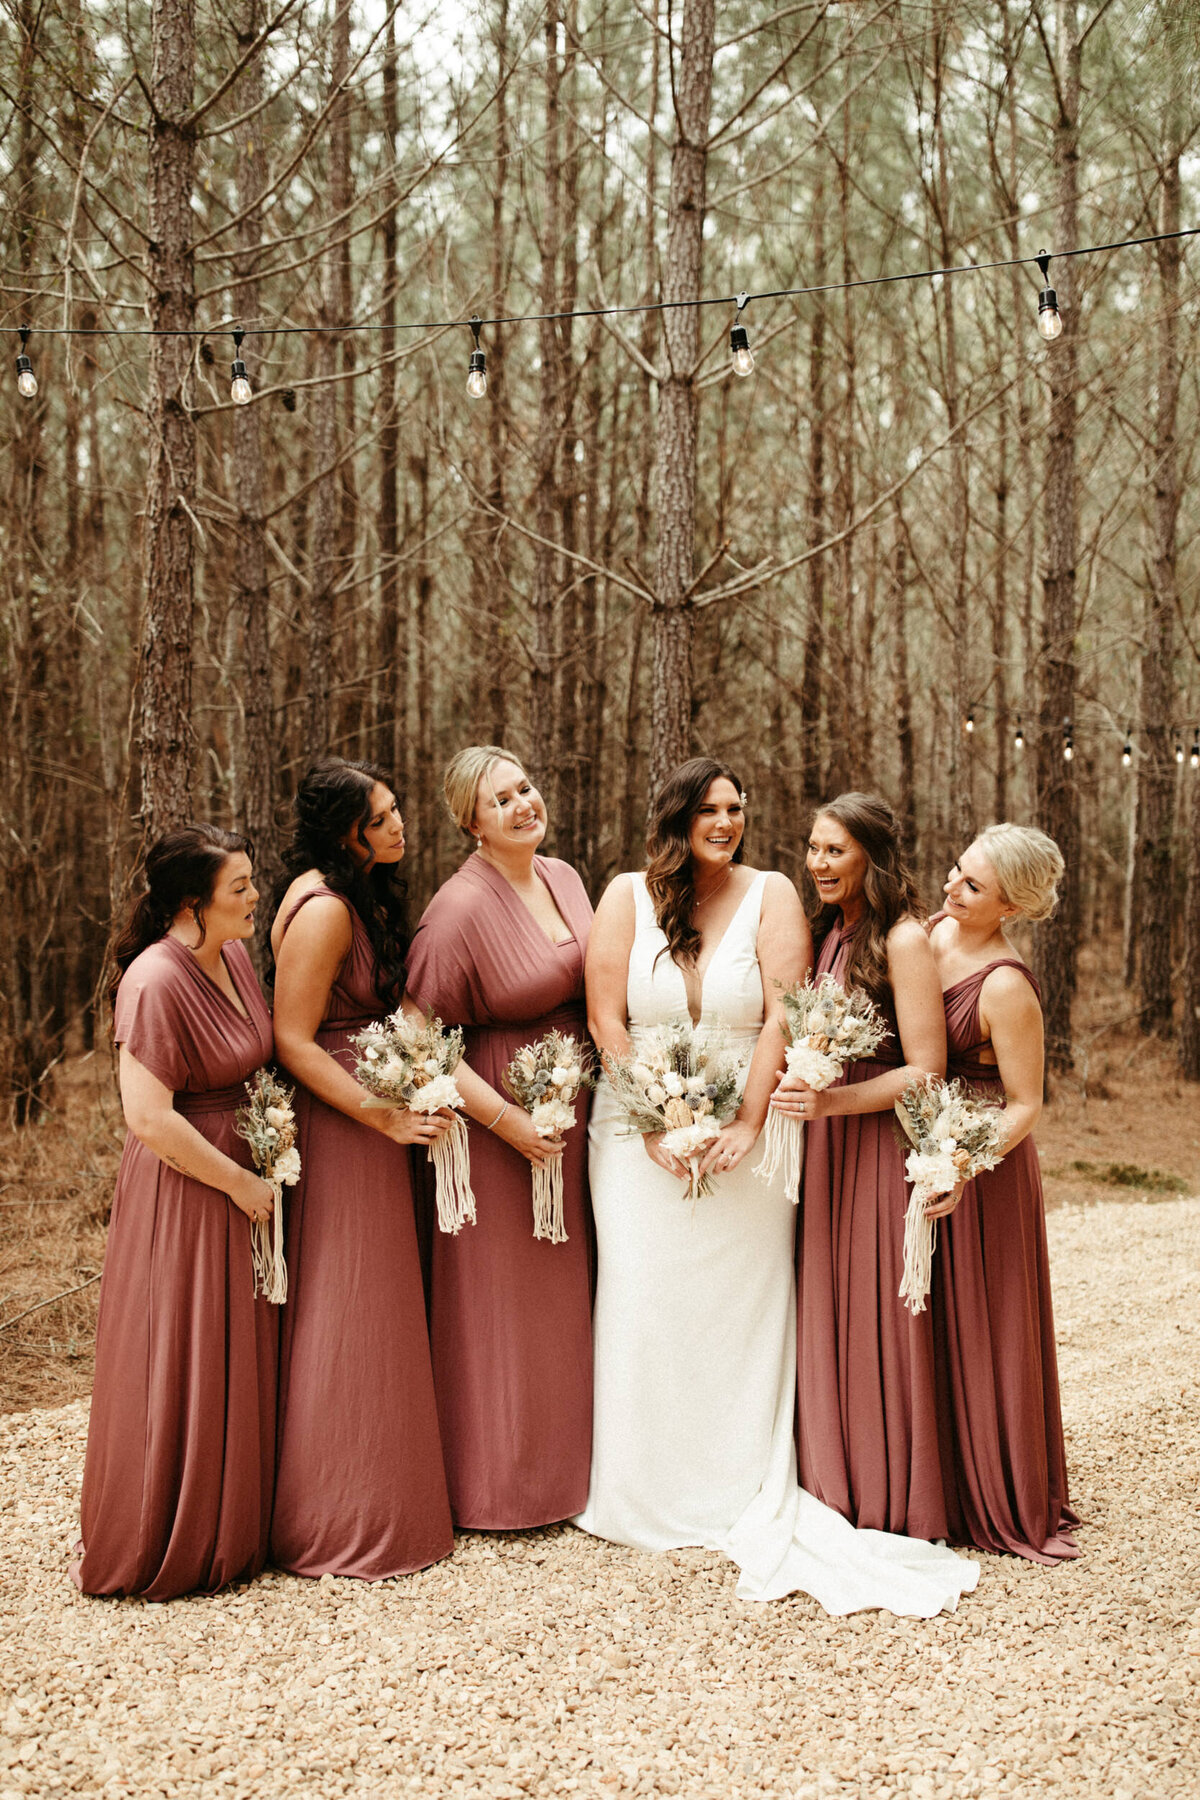 Boho bride with her bridesmaids wearing burgundy dresses and holding dried floral bouquets standing in the woods on a winter day with string lights hanging over them